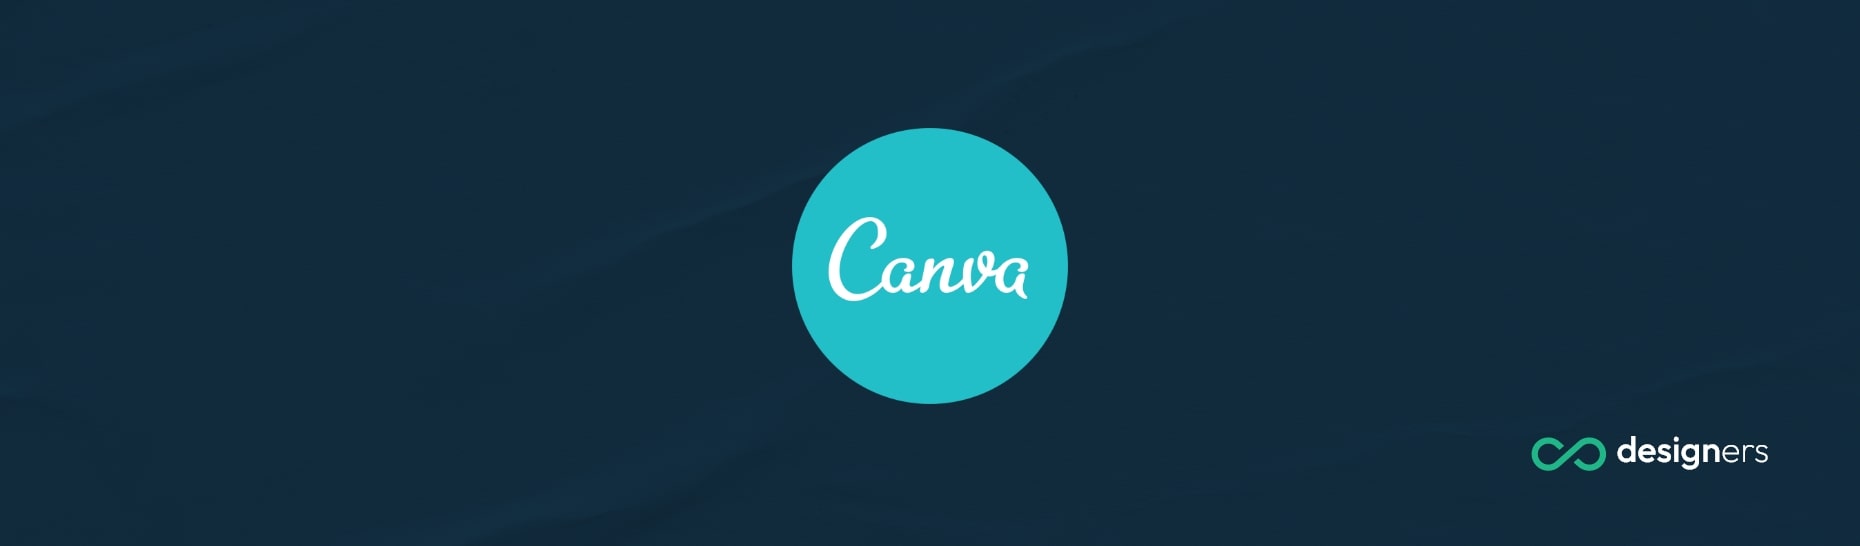 Why Is Canva Making Me Pay to Download?